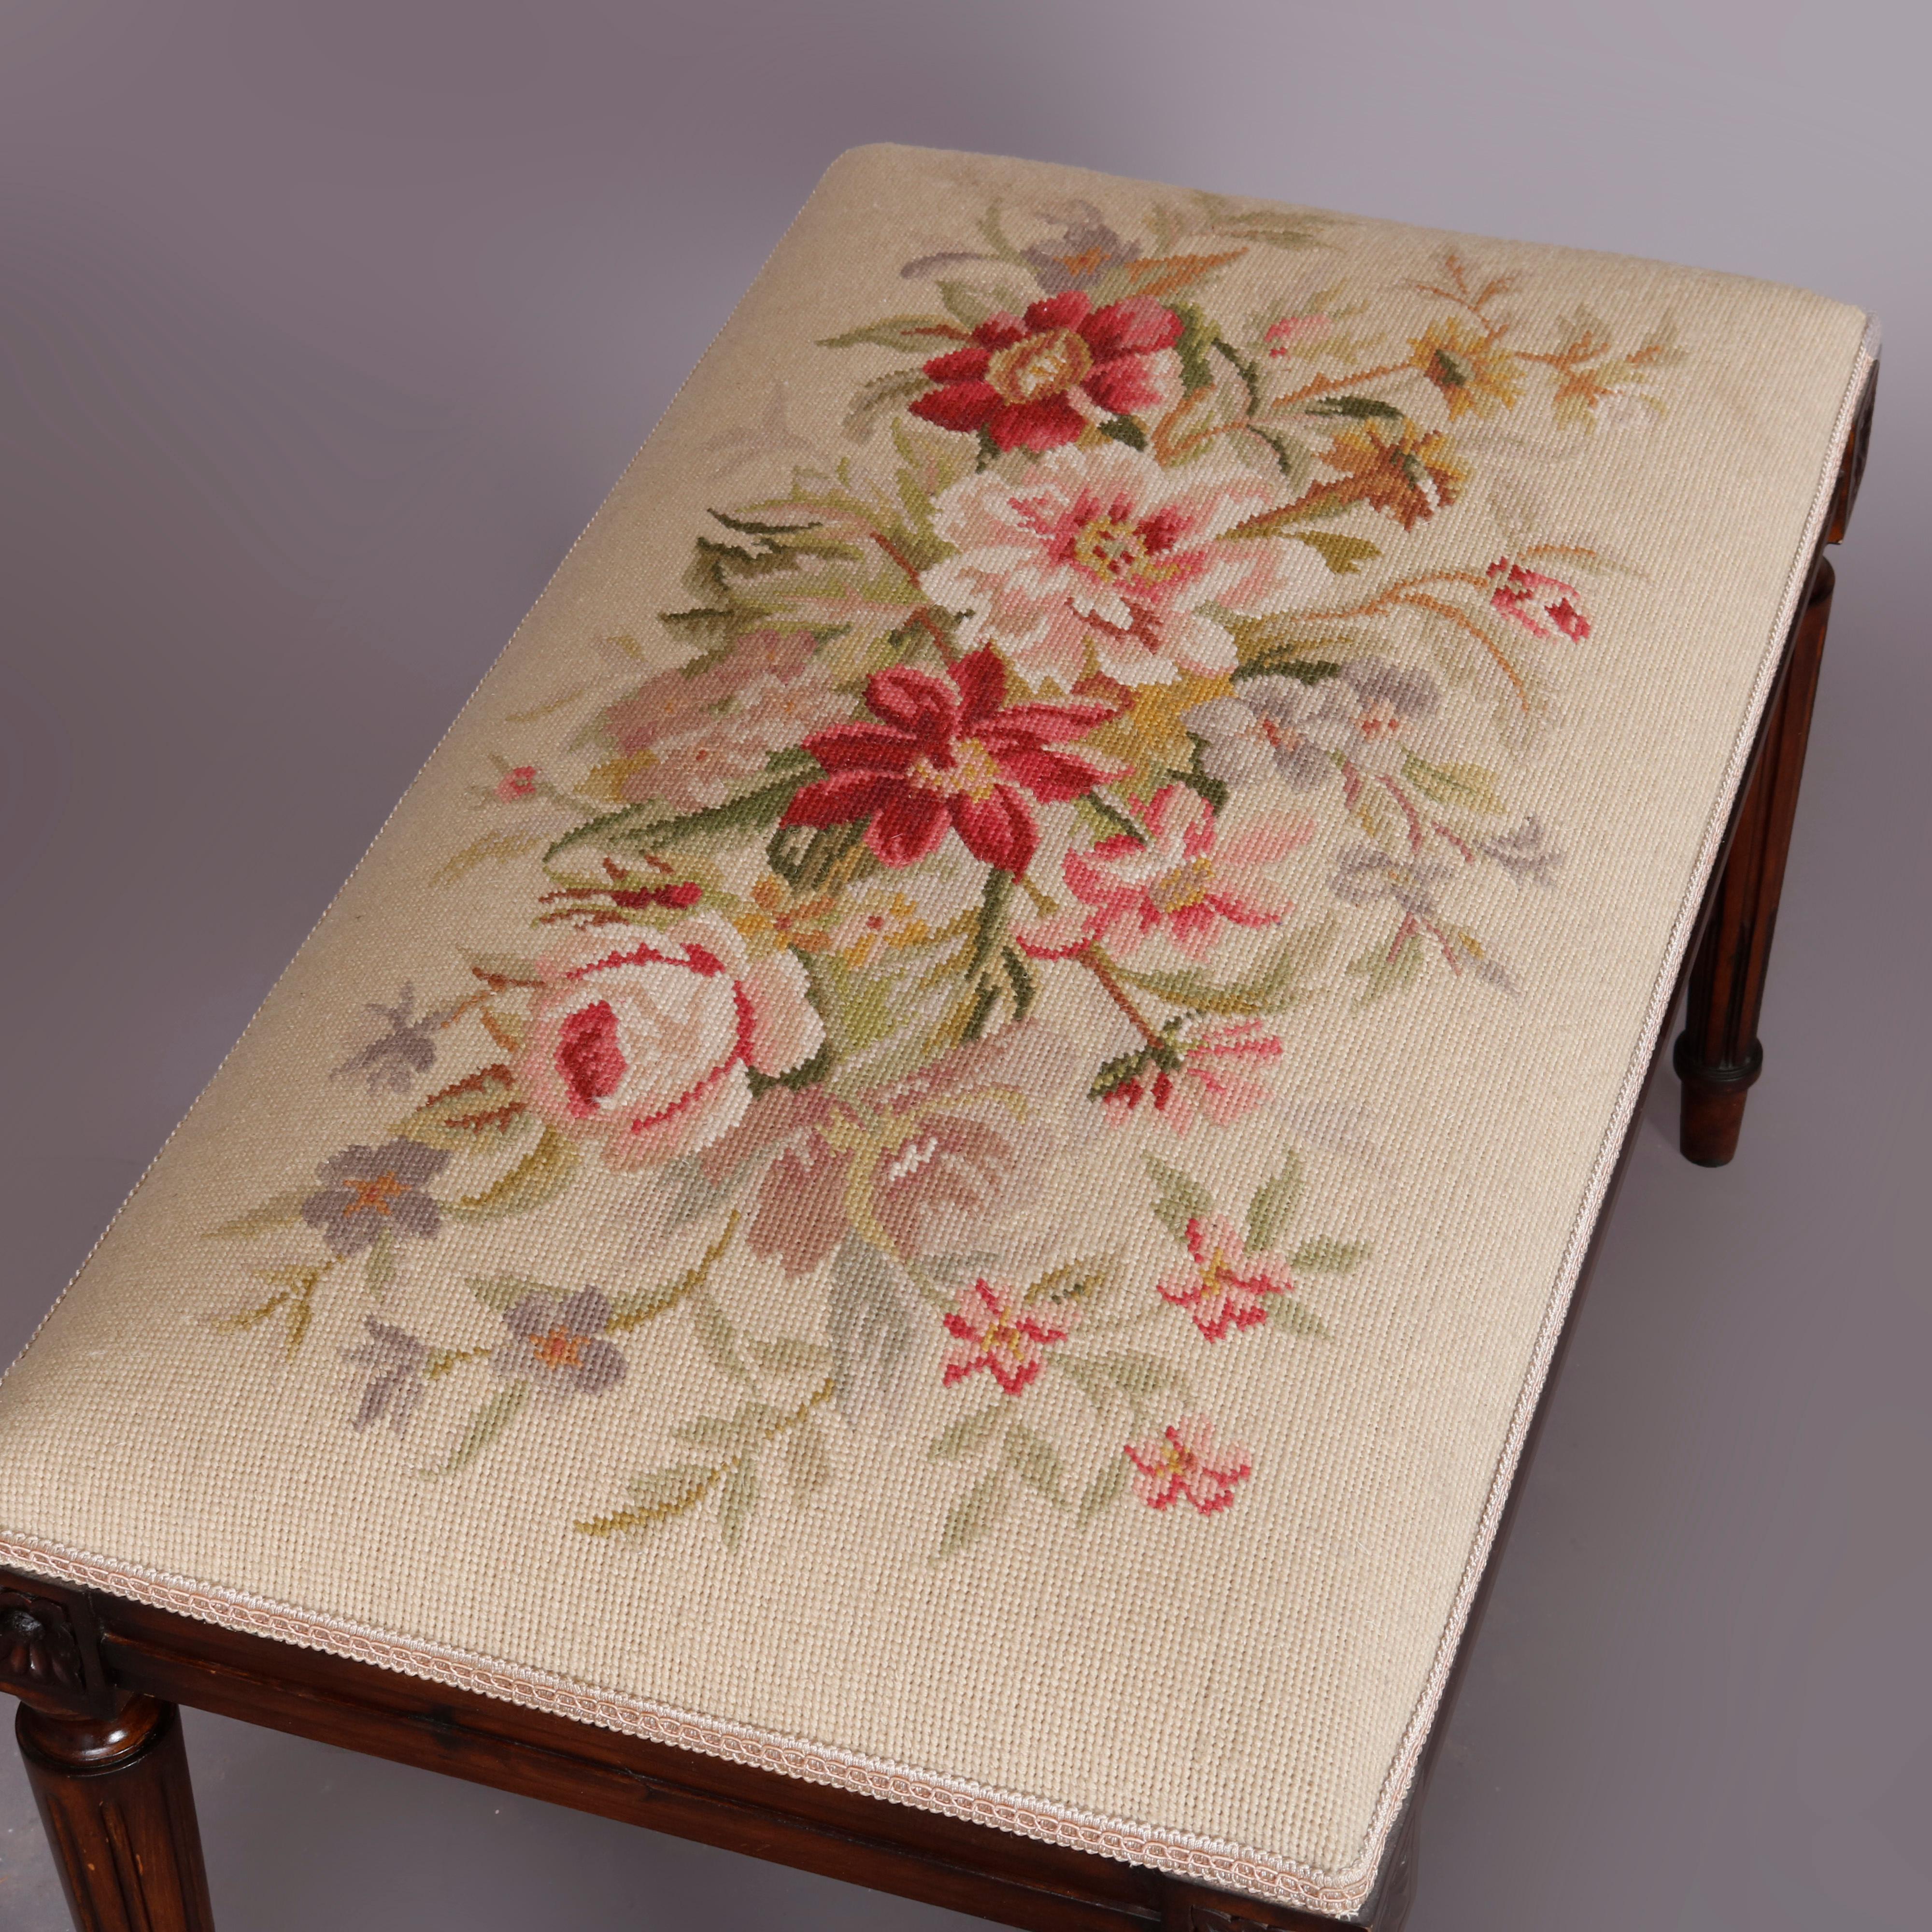 A vintage French Louis XVI style piano bench offers mahogany construction, raised on tapered and fluted legs with rosette joints and surmounted by seat having floral needlepoint upholstery, circa 1930

Measures: 19.5